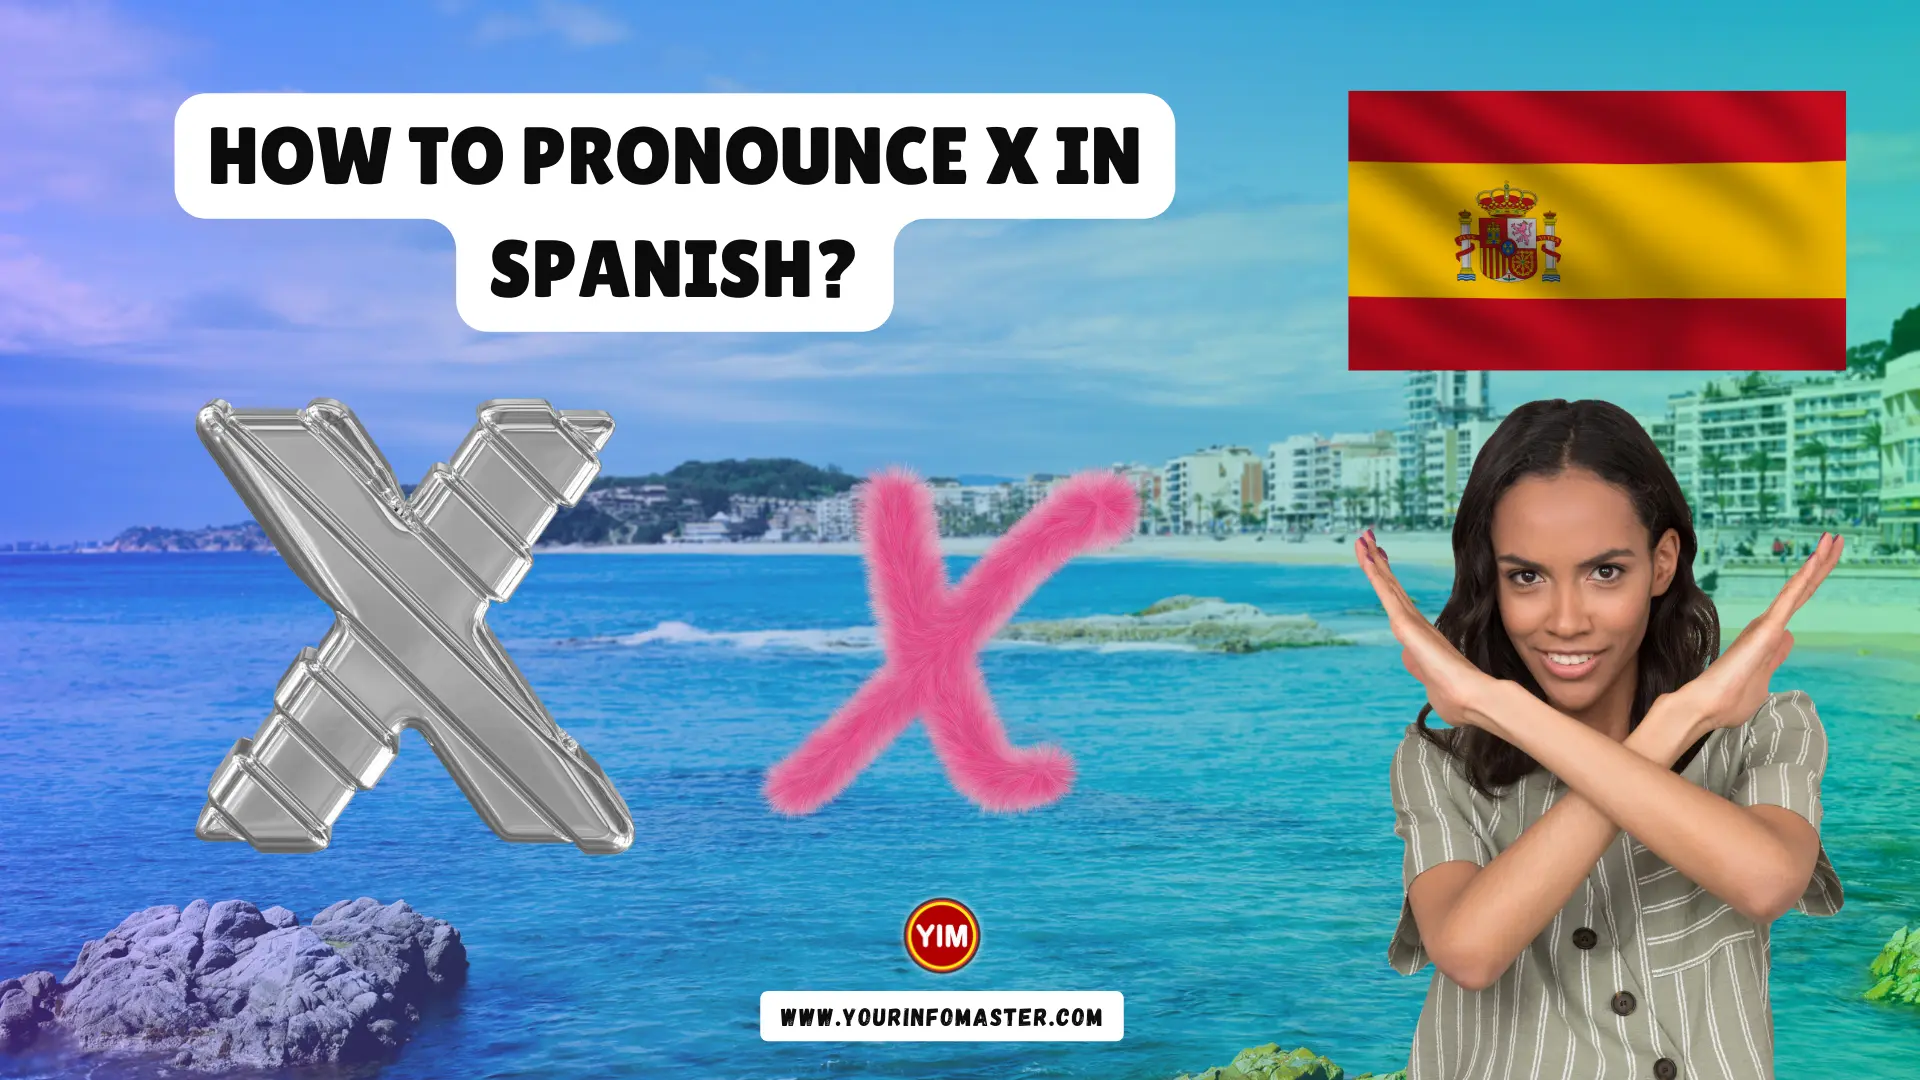 How to Pronounce X in Spanish